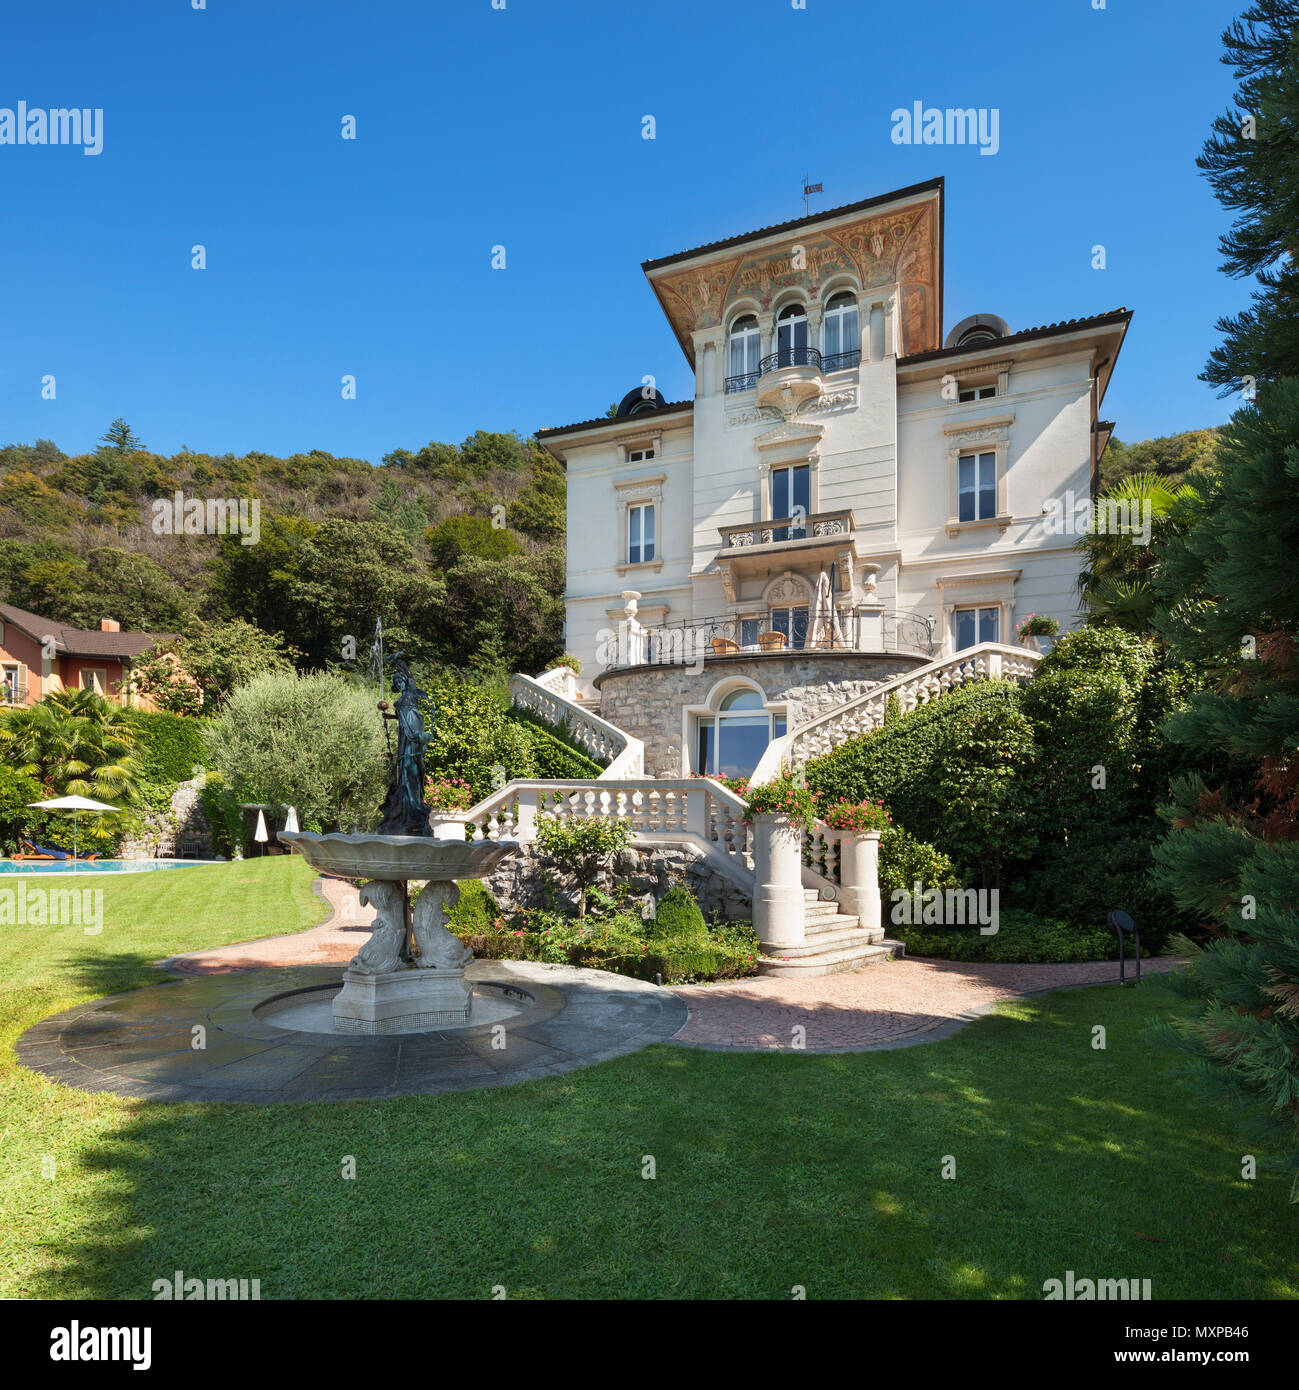 beautiful classical mansion surrounded by a park, outdoors Stock Photo